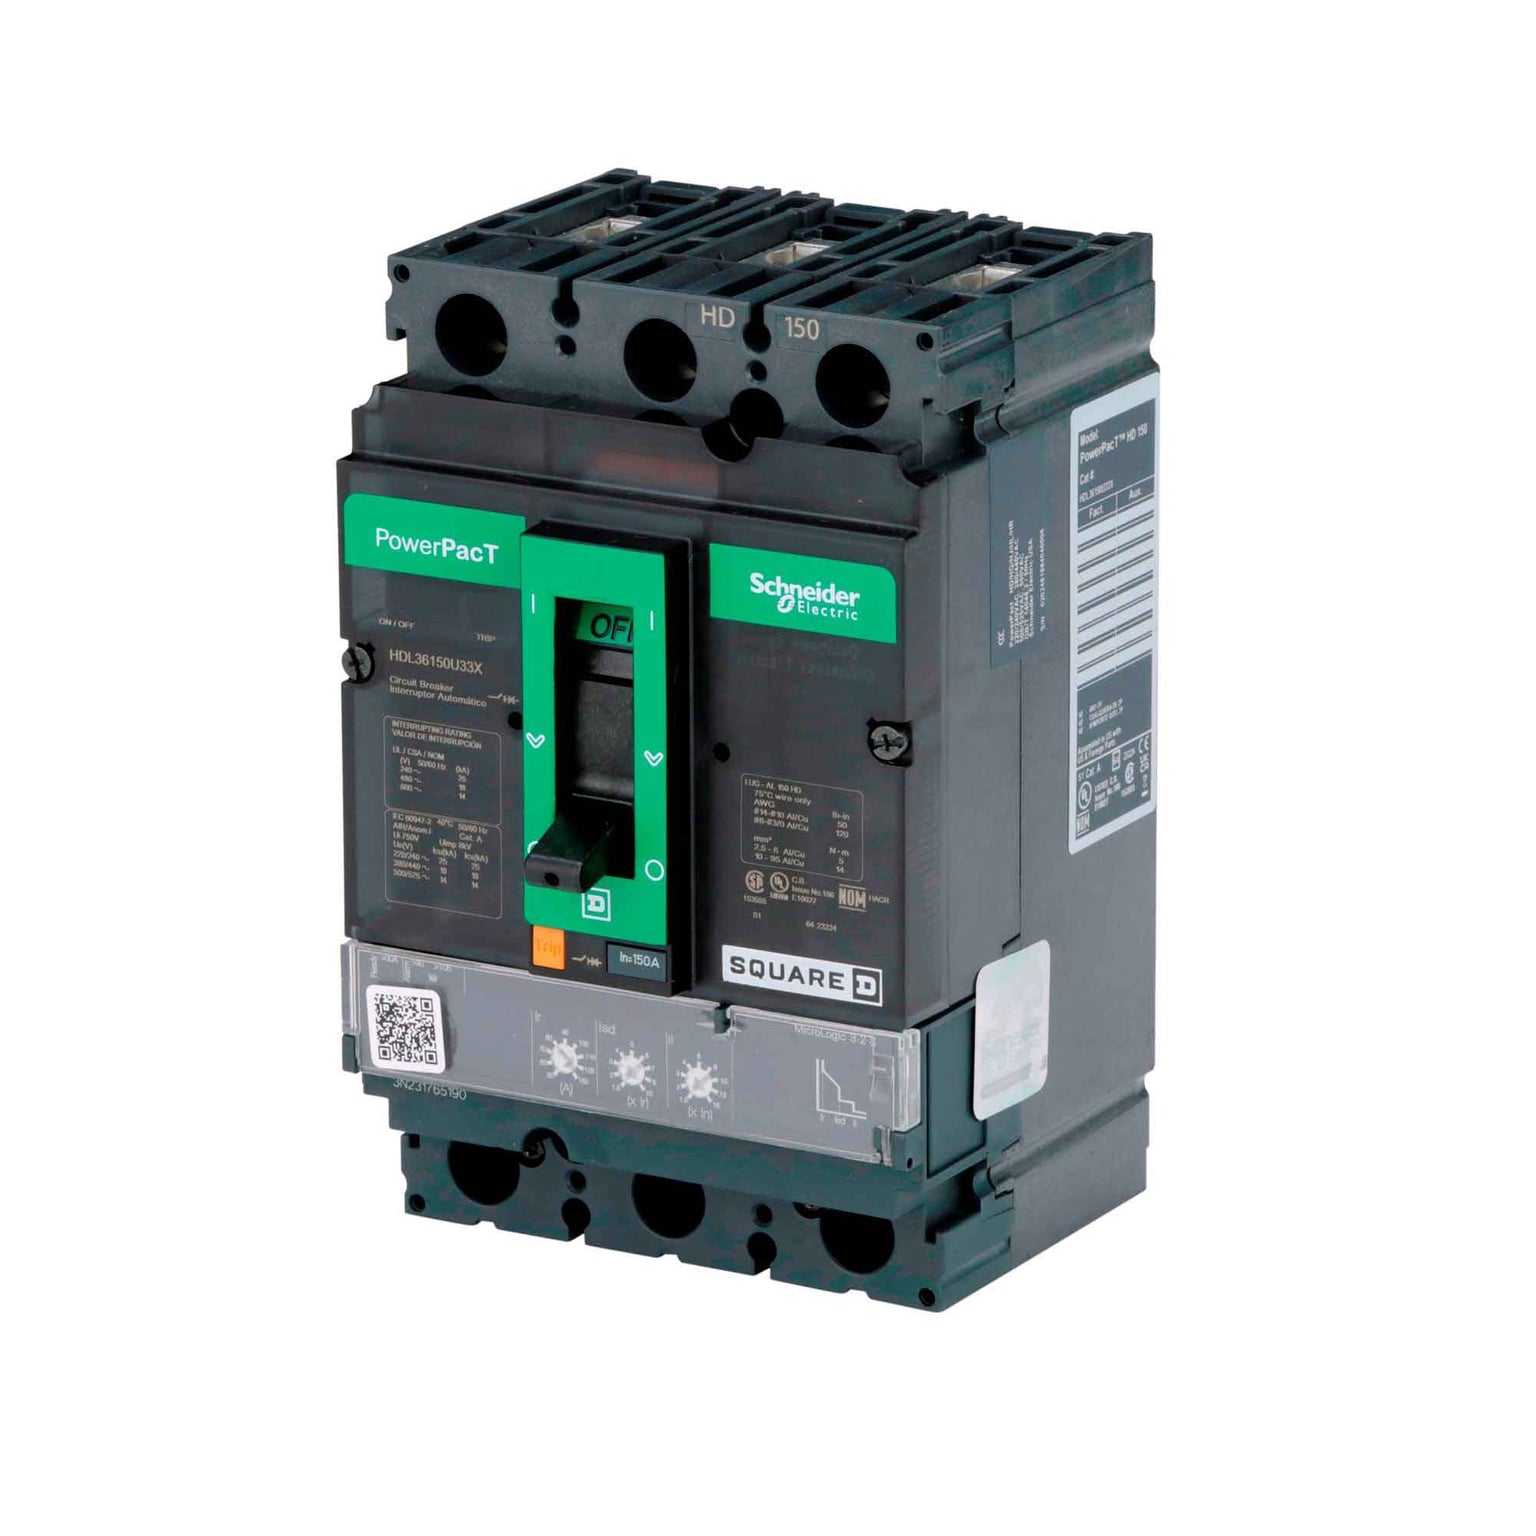 HDL36150U33X - Square D - Molded Case Circuit Breakers